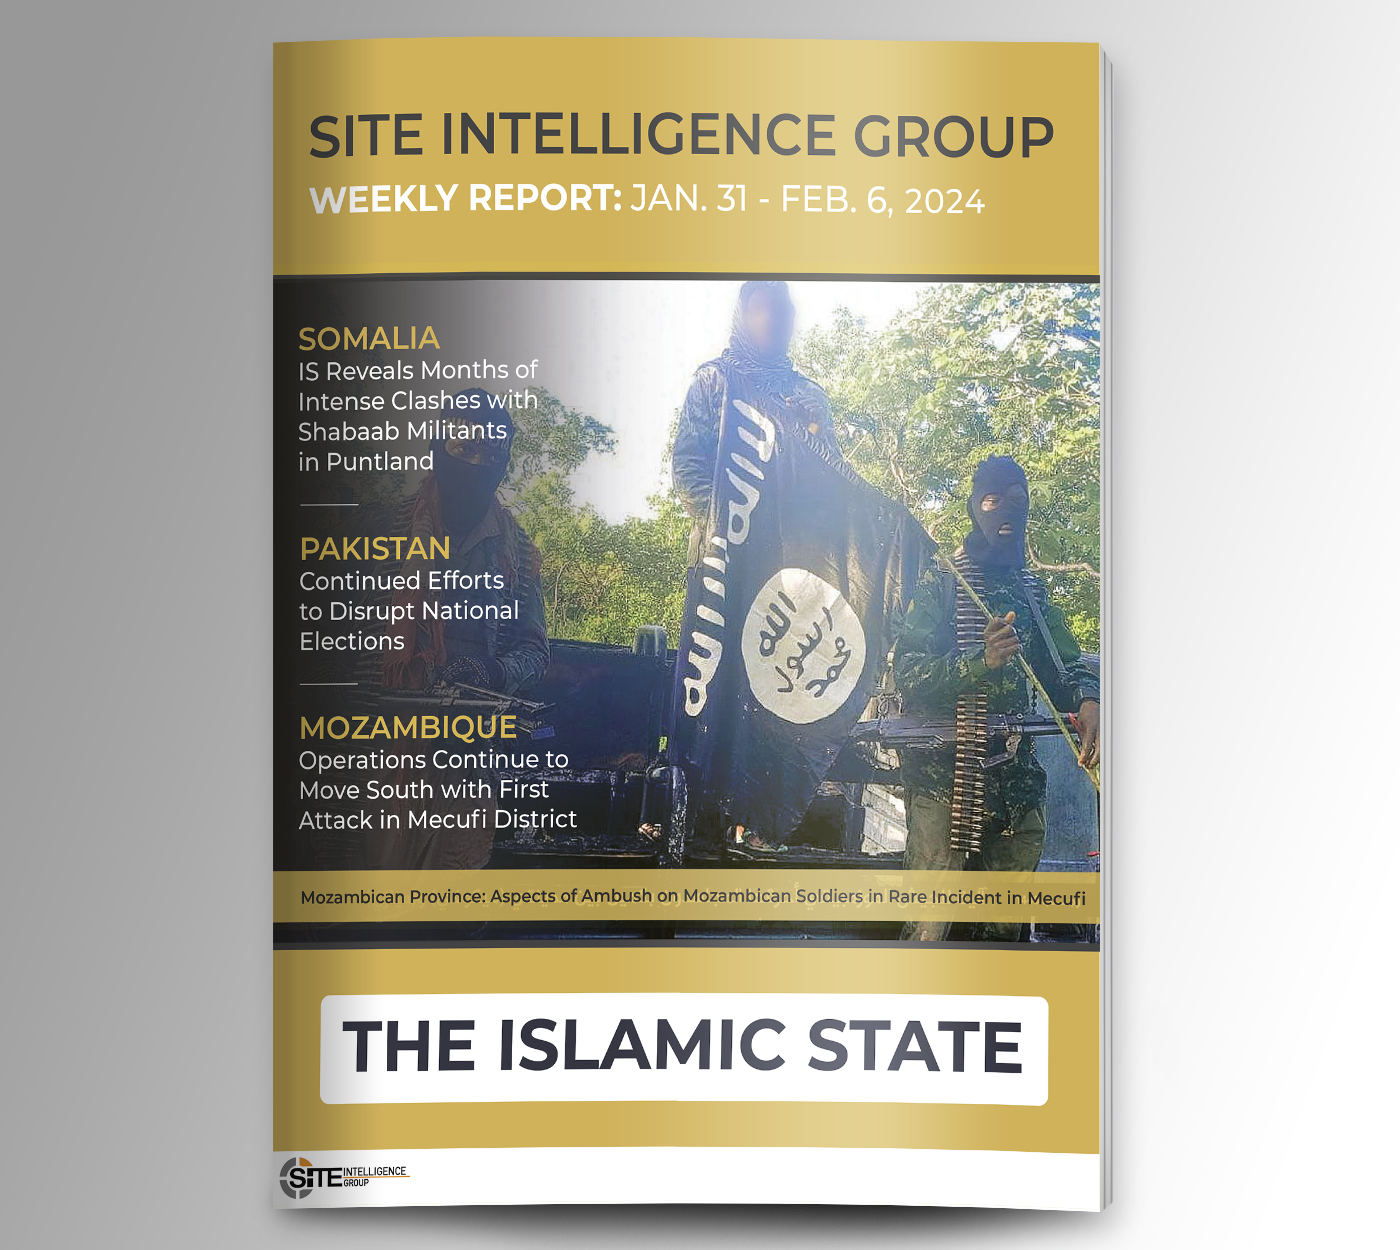 Weekly inSITE on the Islamic State for January 31-February 6, 2024